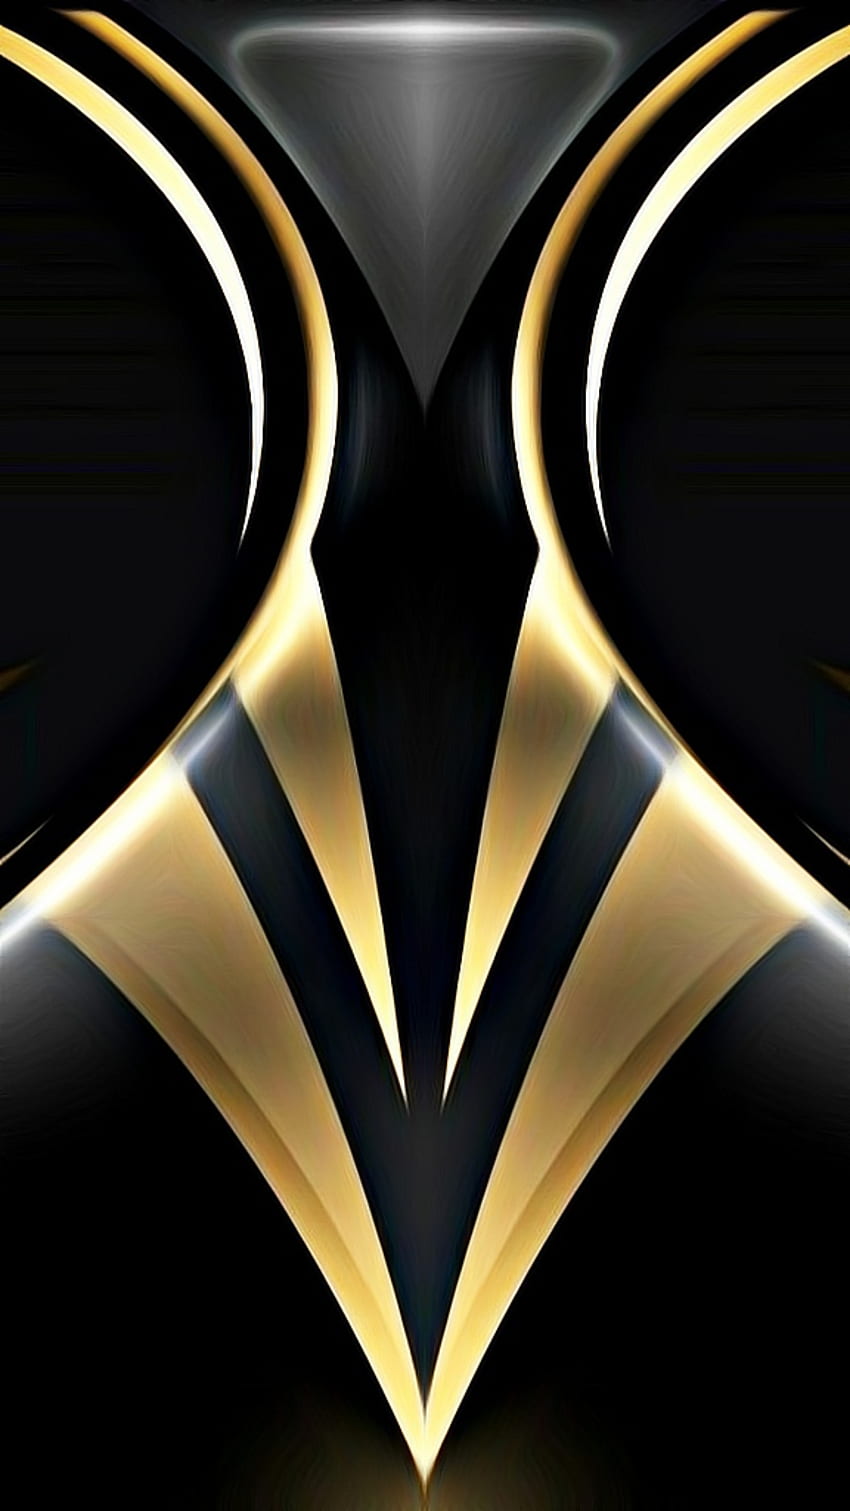 fdgjhk, shadow, arrow, android, pattern, triangle, gold, 3d, samsung, modern, shapes, design, galaxy, digital, new, texture, cool, black, abstract, iphone, plus, orange, material, mate, , geometric, lg HD phone wallpaper